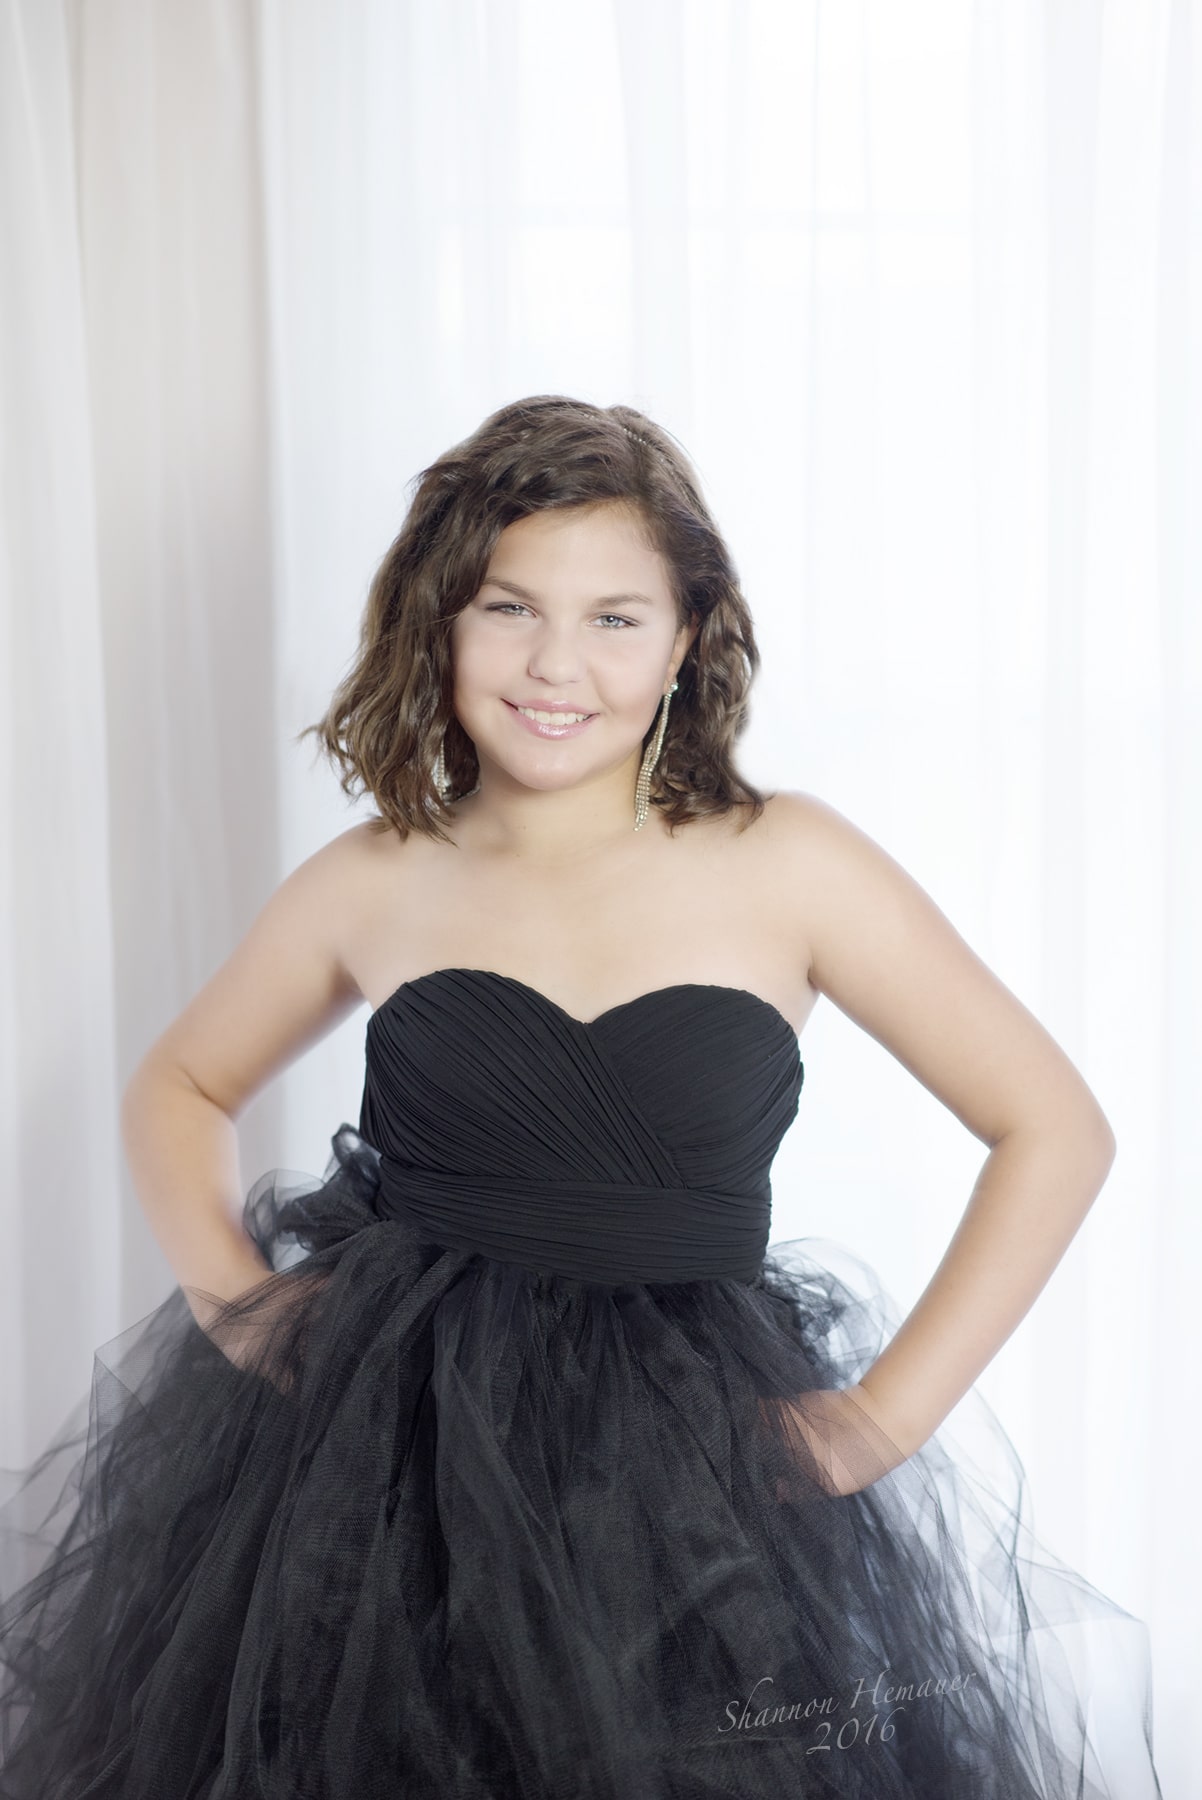 Tween Contemporary Glamour York, PA Shannon Hemauer Photography